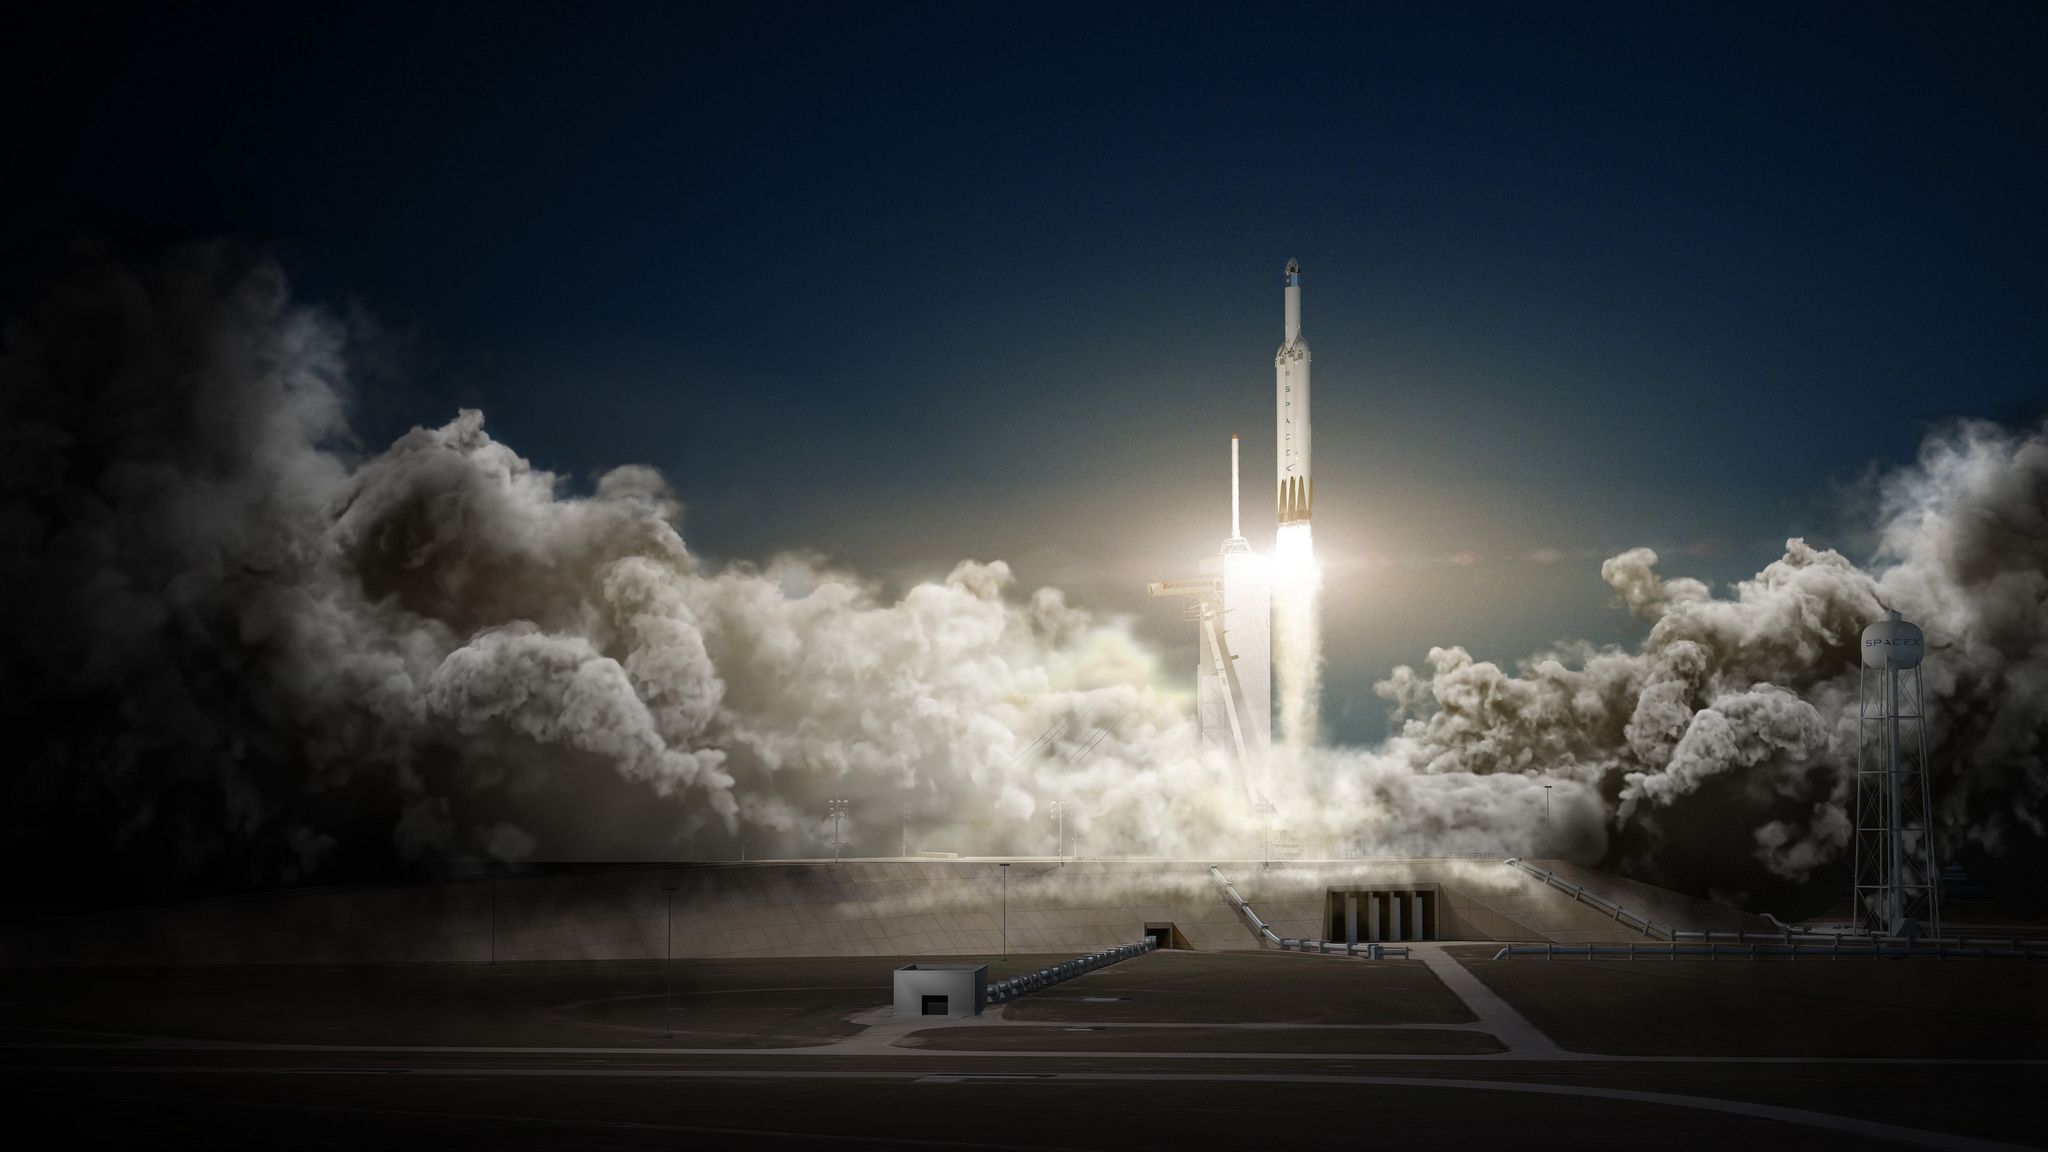 SpaceX plans to send tourists around the Moon in 2018 ...
